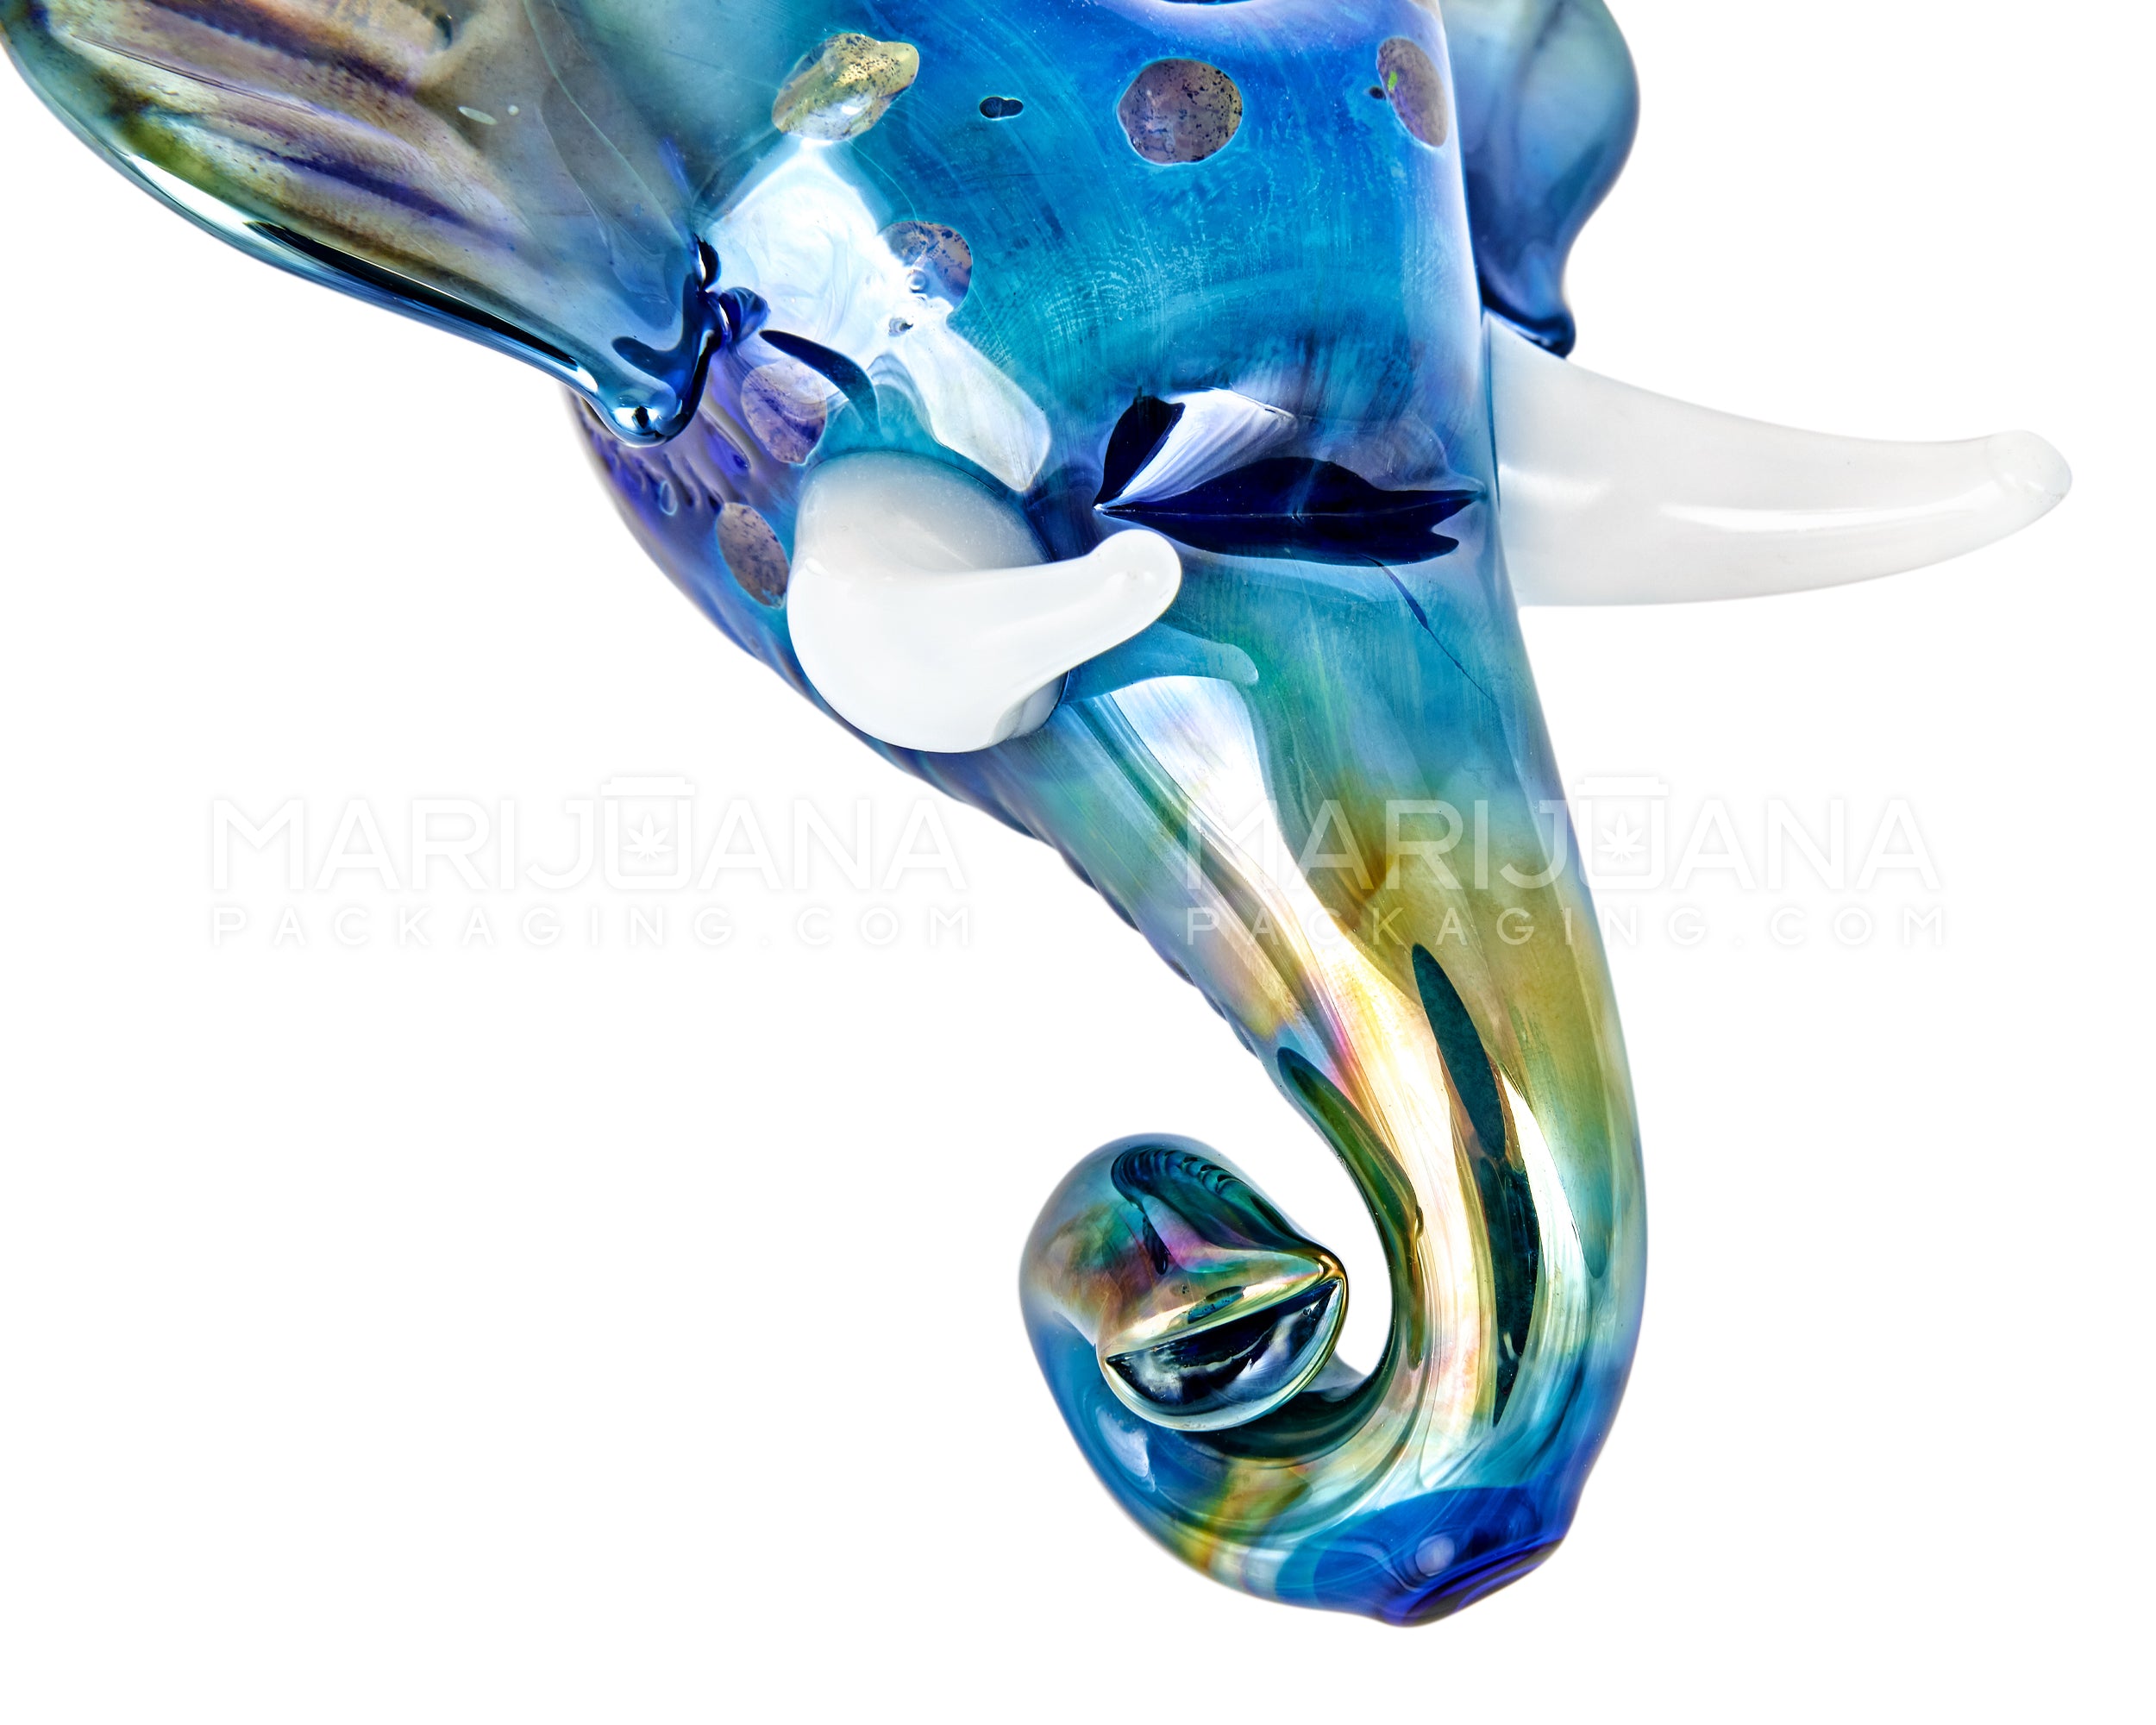 Metallic Coated Elephant Head Hand Pipe | 5in Long - Glass - Iridescent Blue - 4